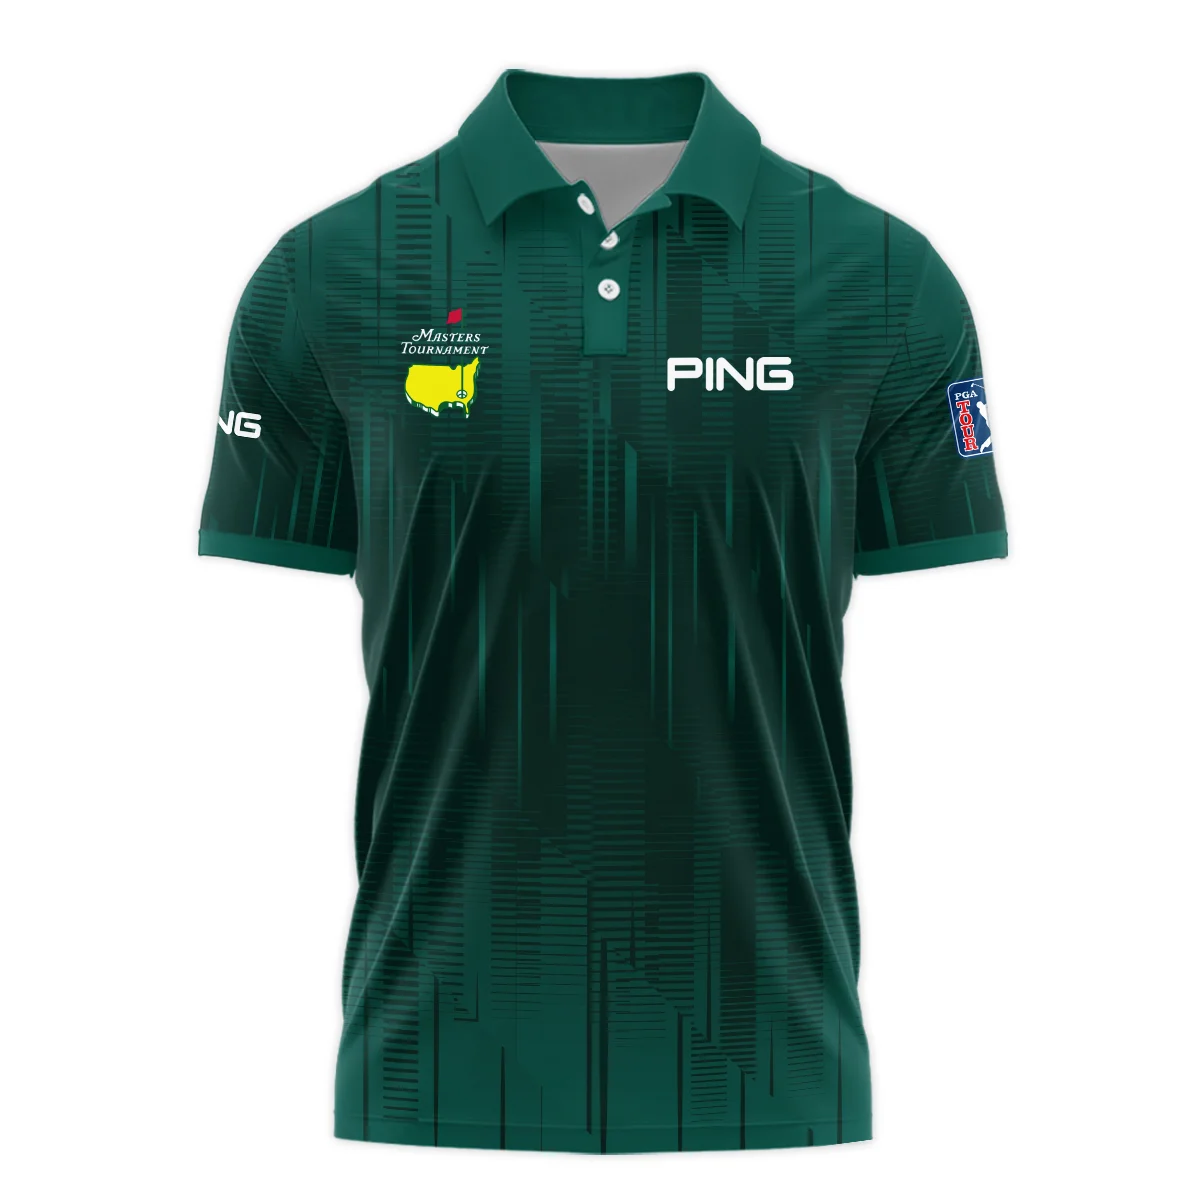 Masters Tournament Ping Dark Green Gradient Stripes Pattern Vneck Polo Shirt Style Classic Polo Shirt For Men